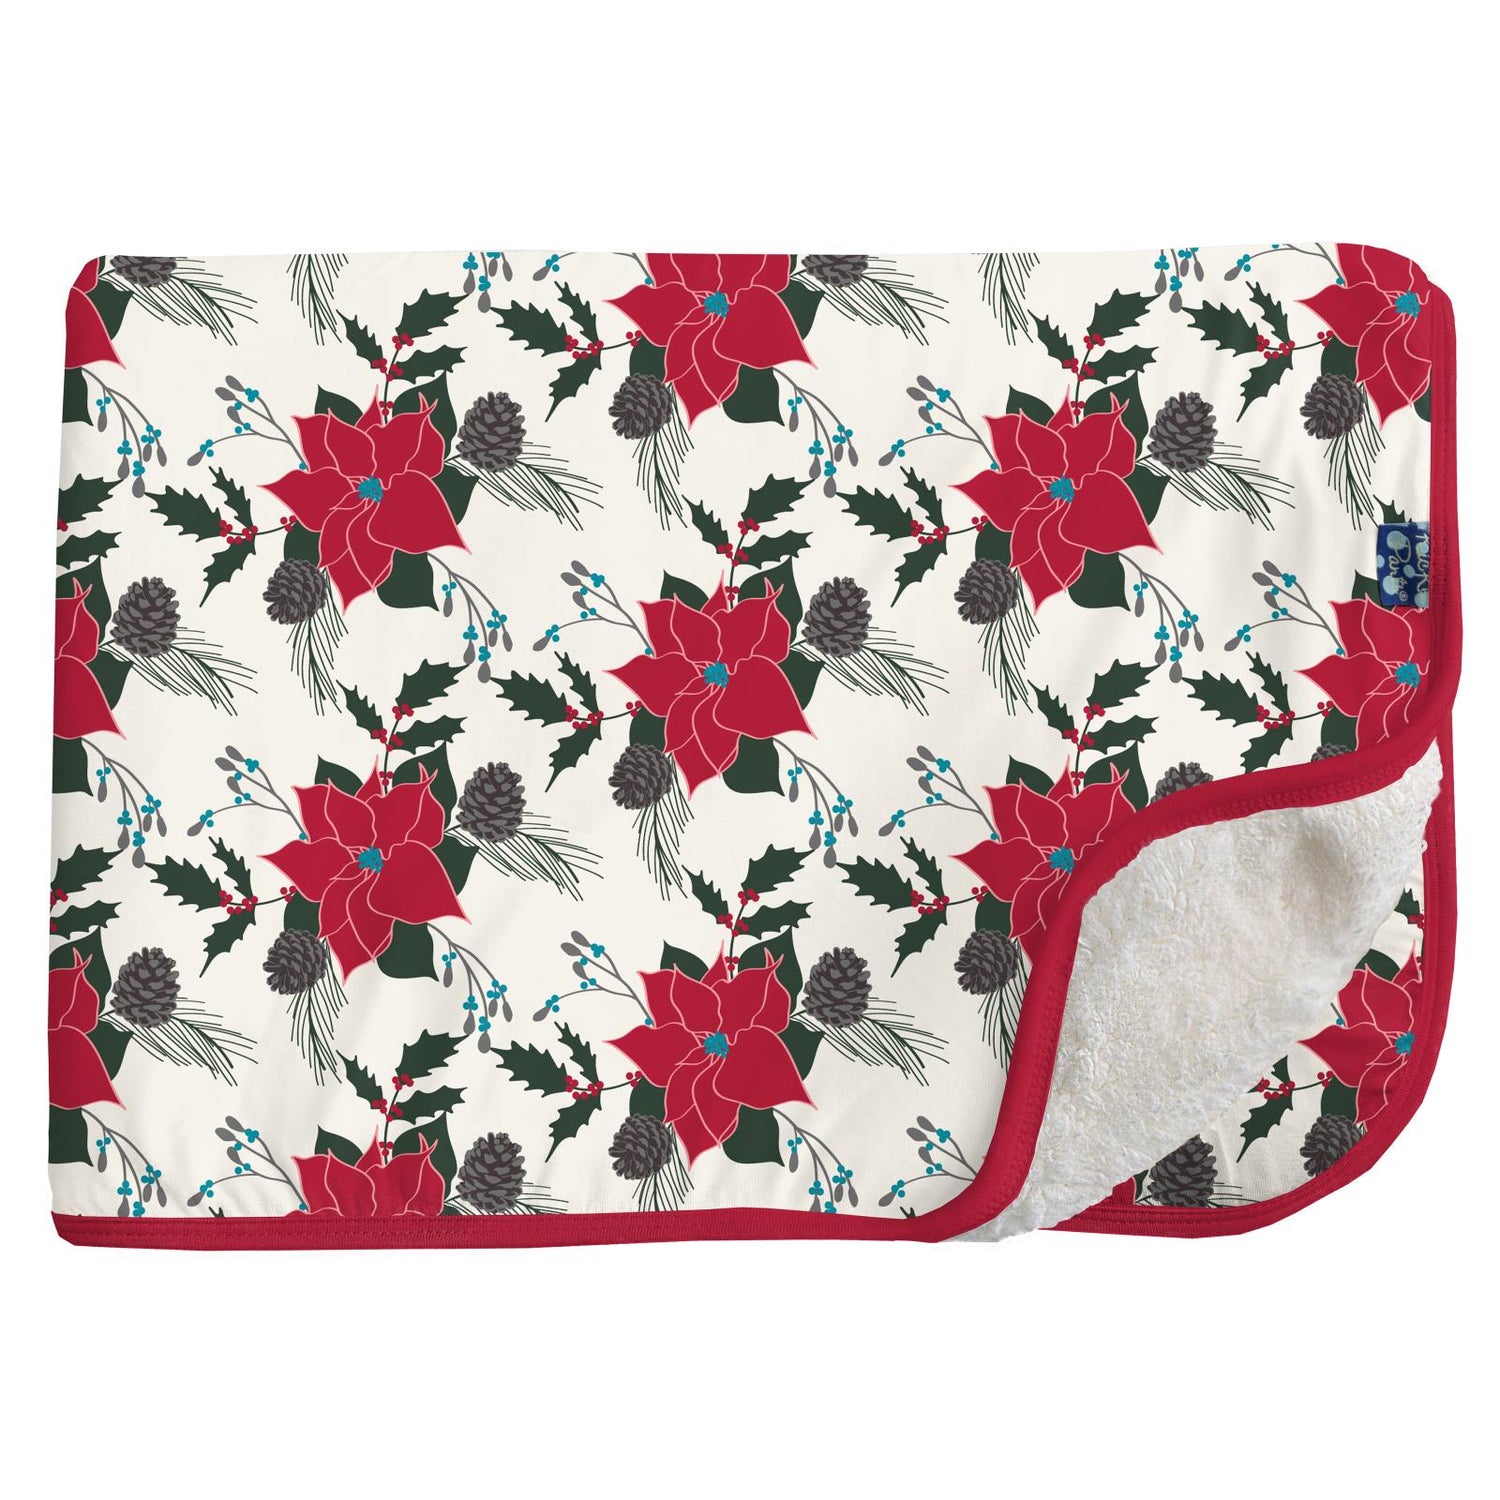 Print Sherpa-Lined Toddler Blanket in Christmas Floral